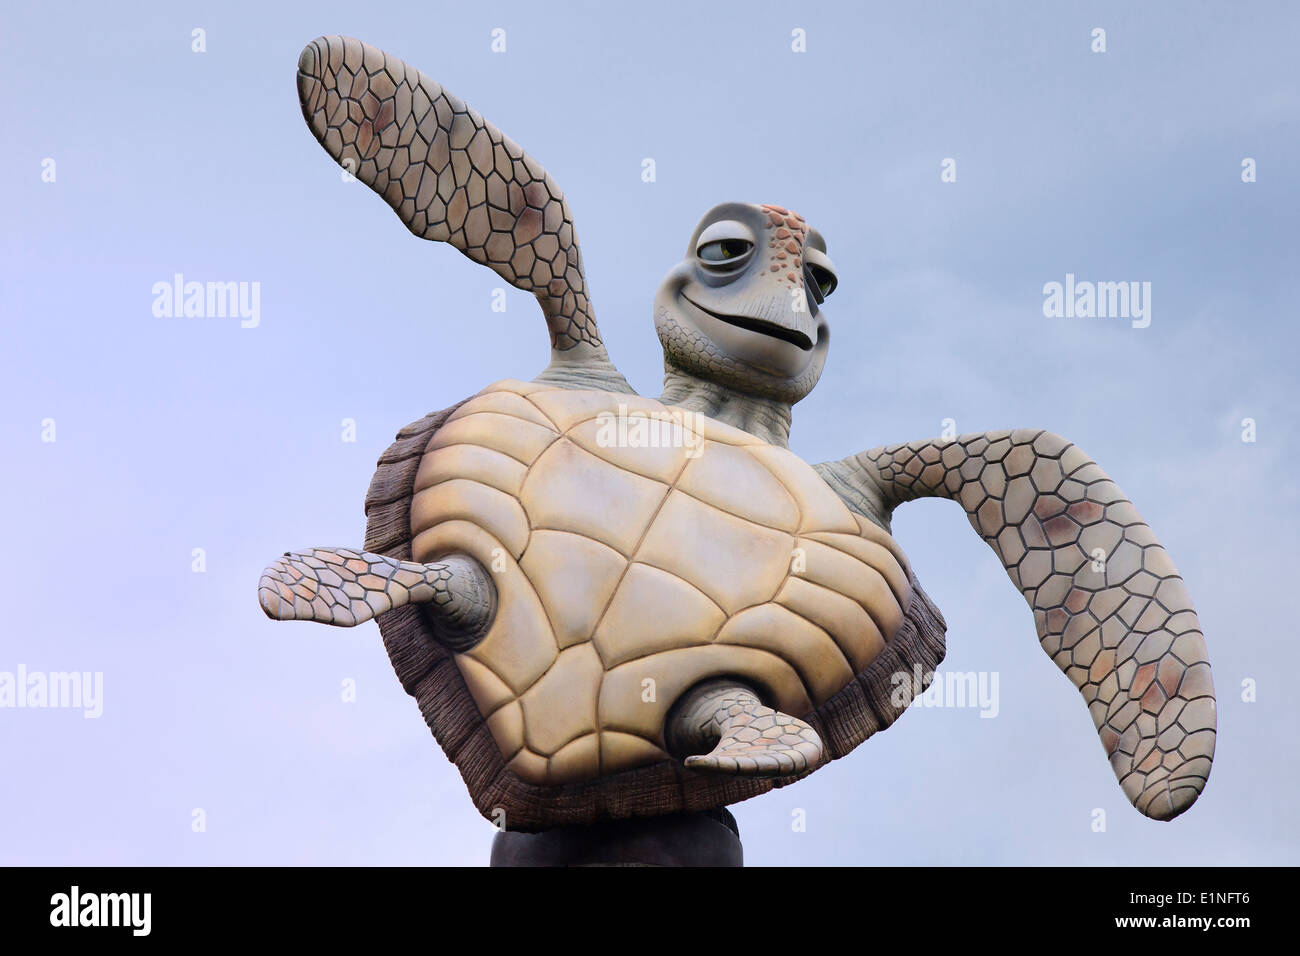 Statue of Crush, the turtle character from the film Finding Nemo, at Disneyland, Paris Stock Photo